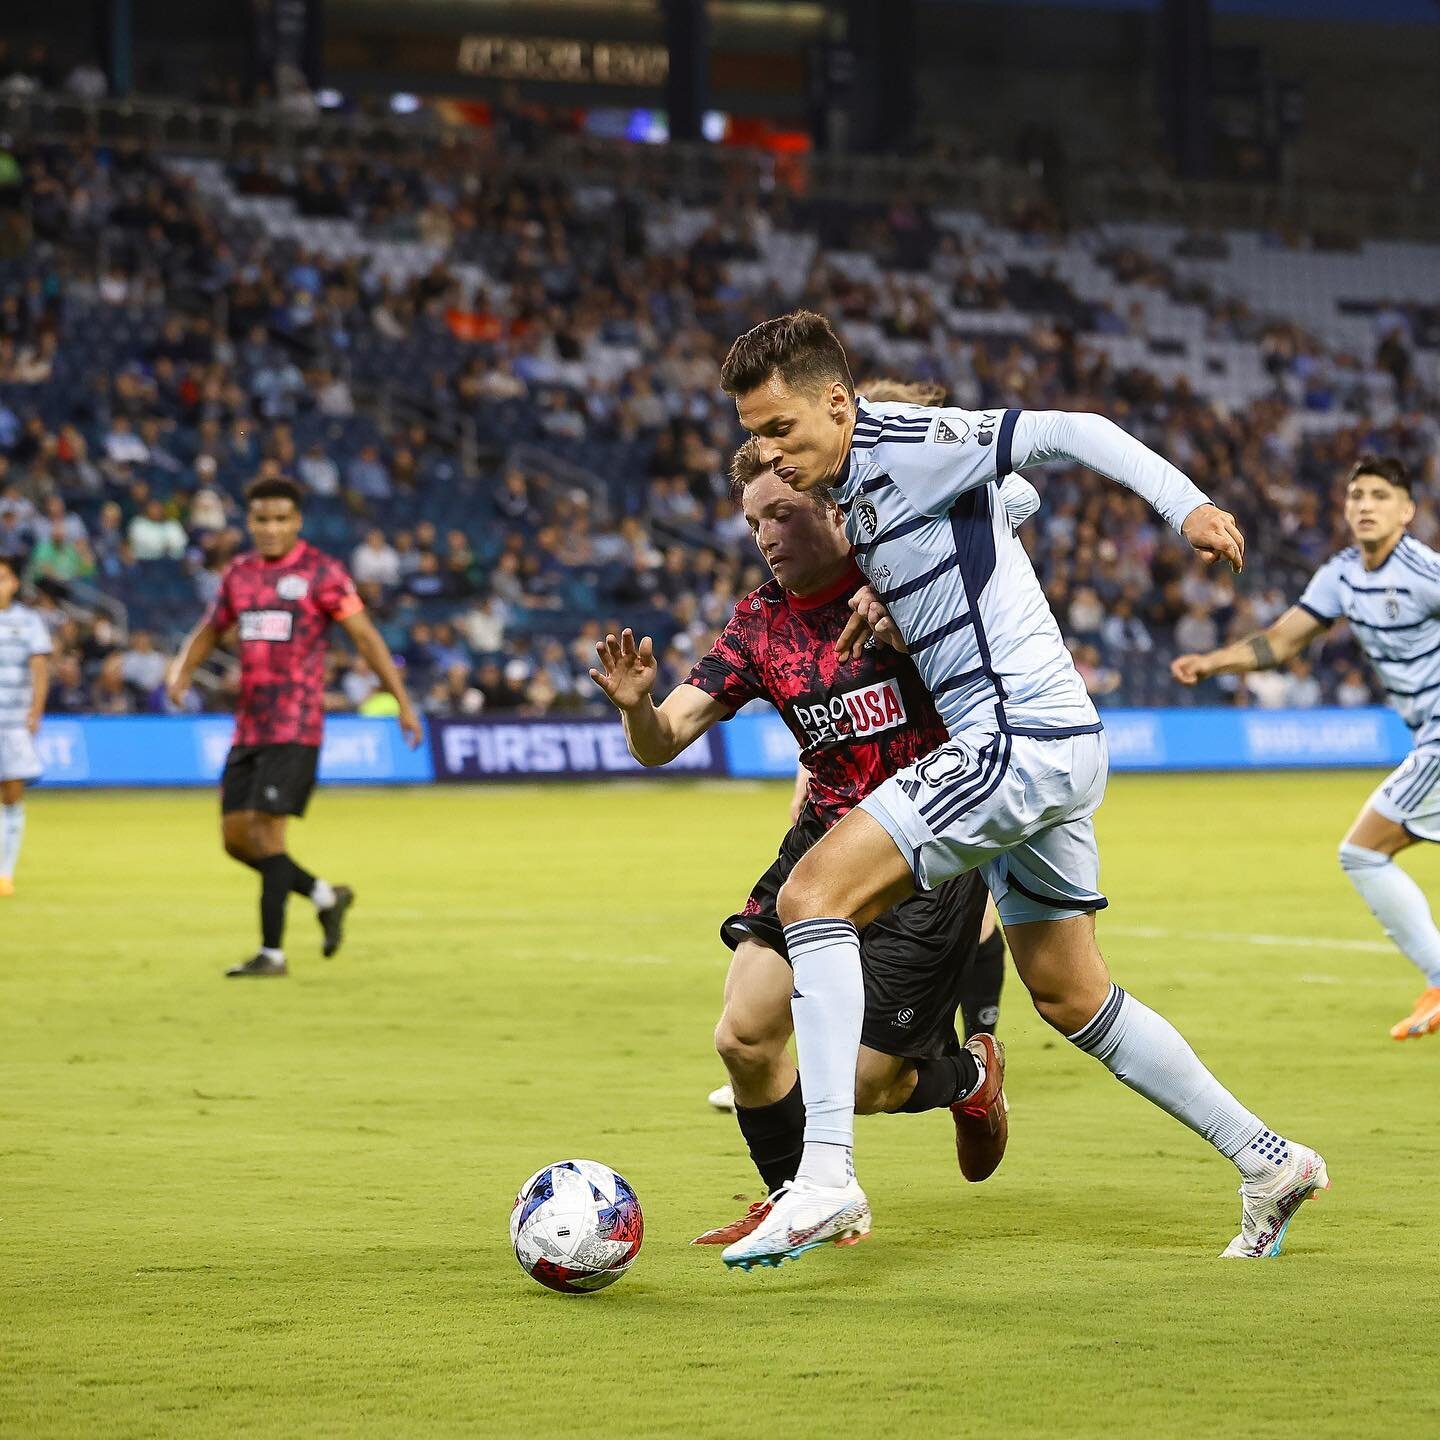 Sporting KC comes away with a win vs Tulsa Athletic in U.S. Open Cup.